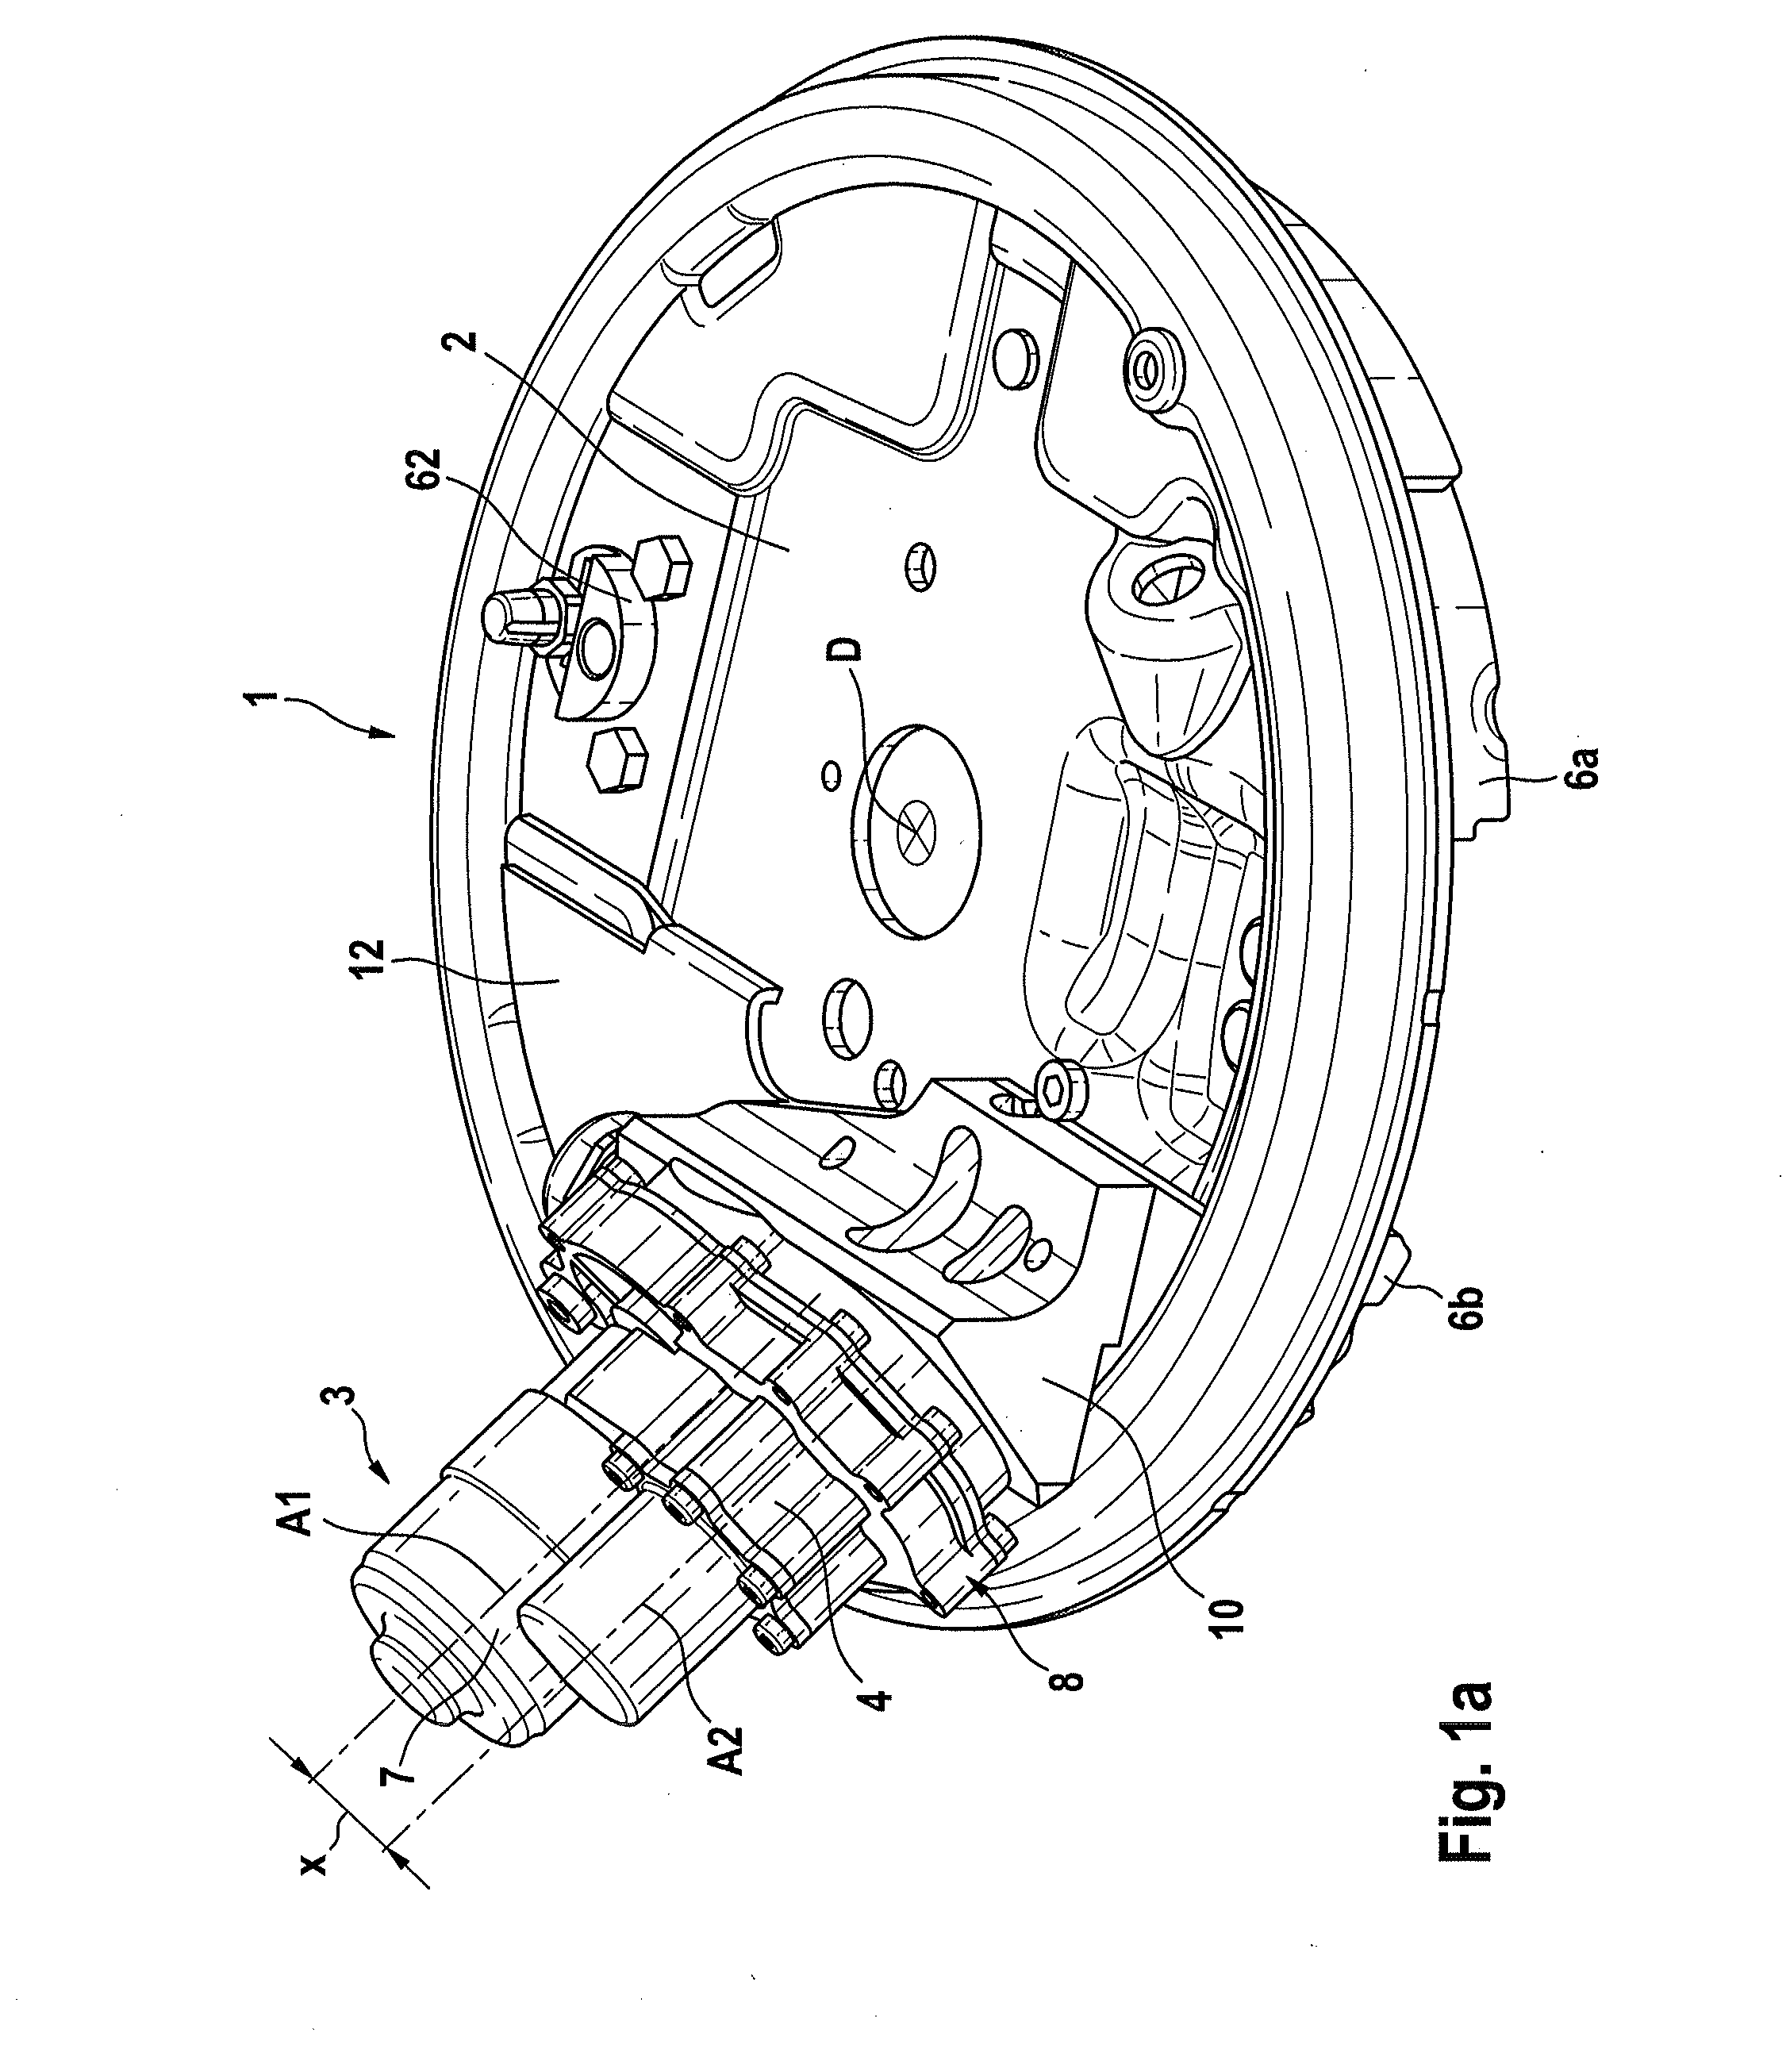 Drum brake module which can be operated by electric motor